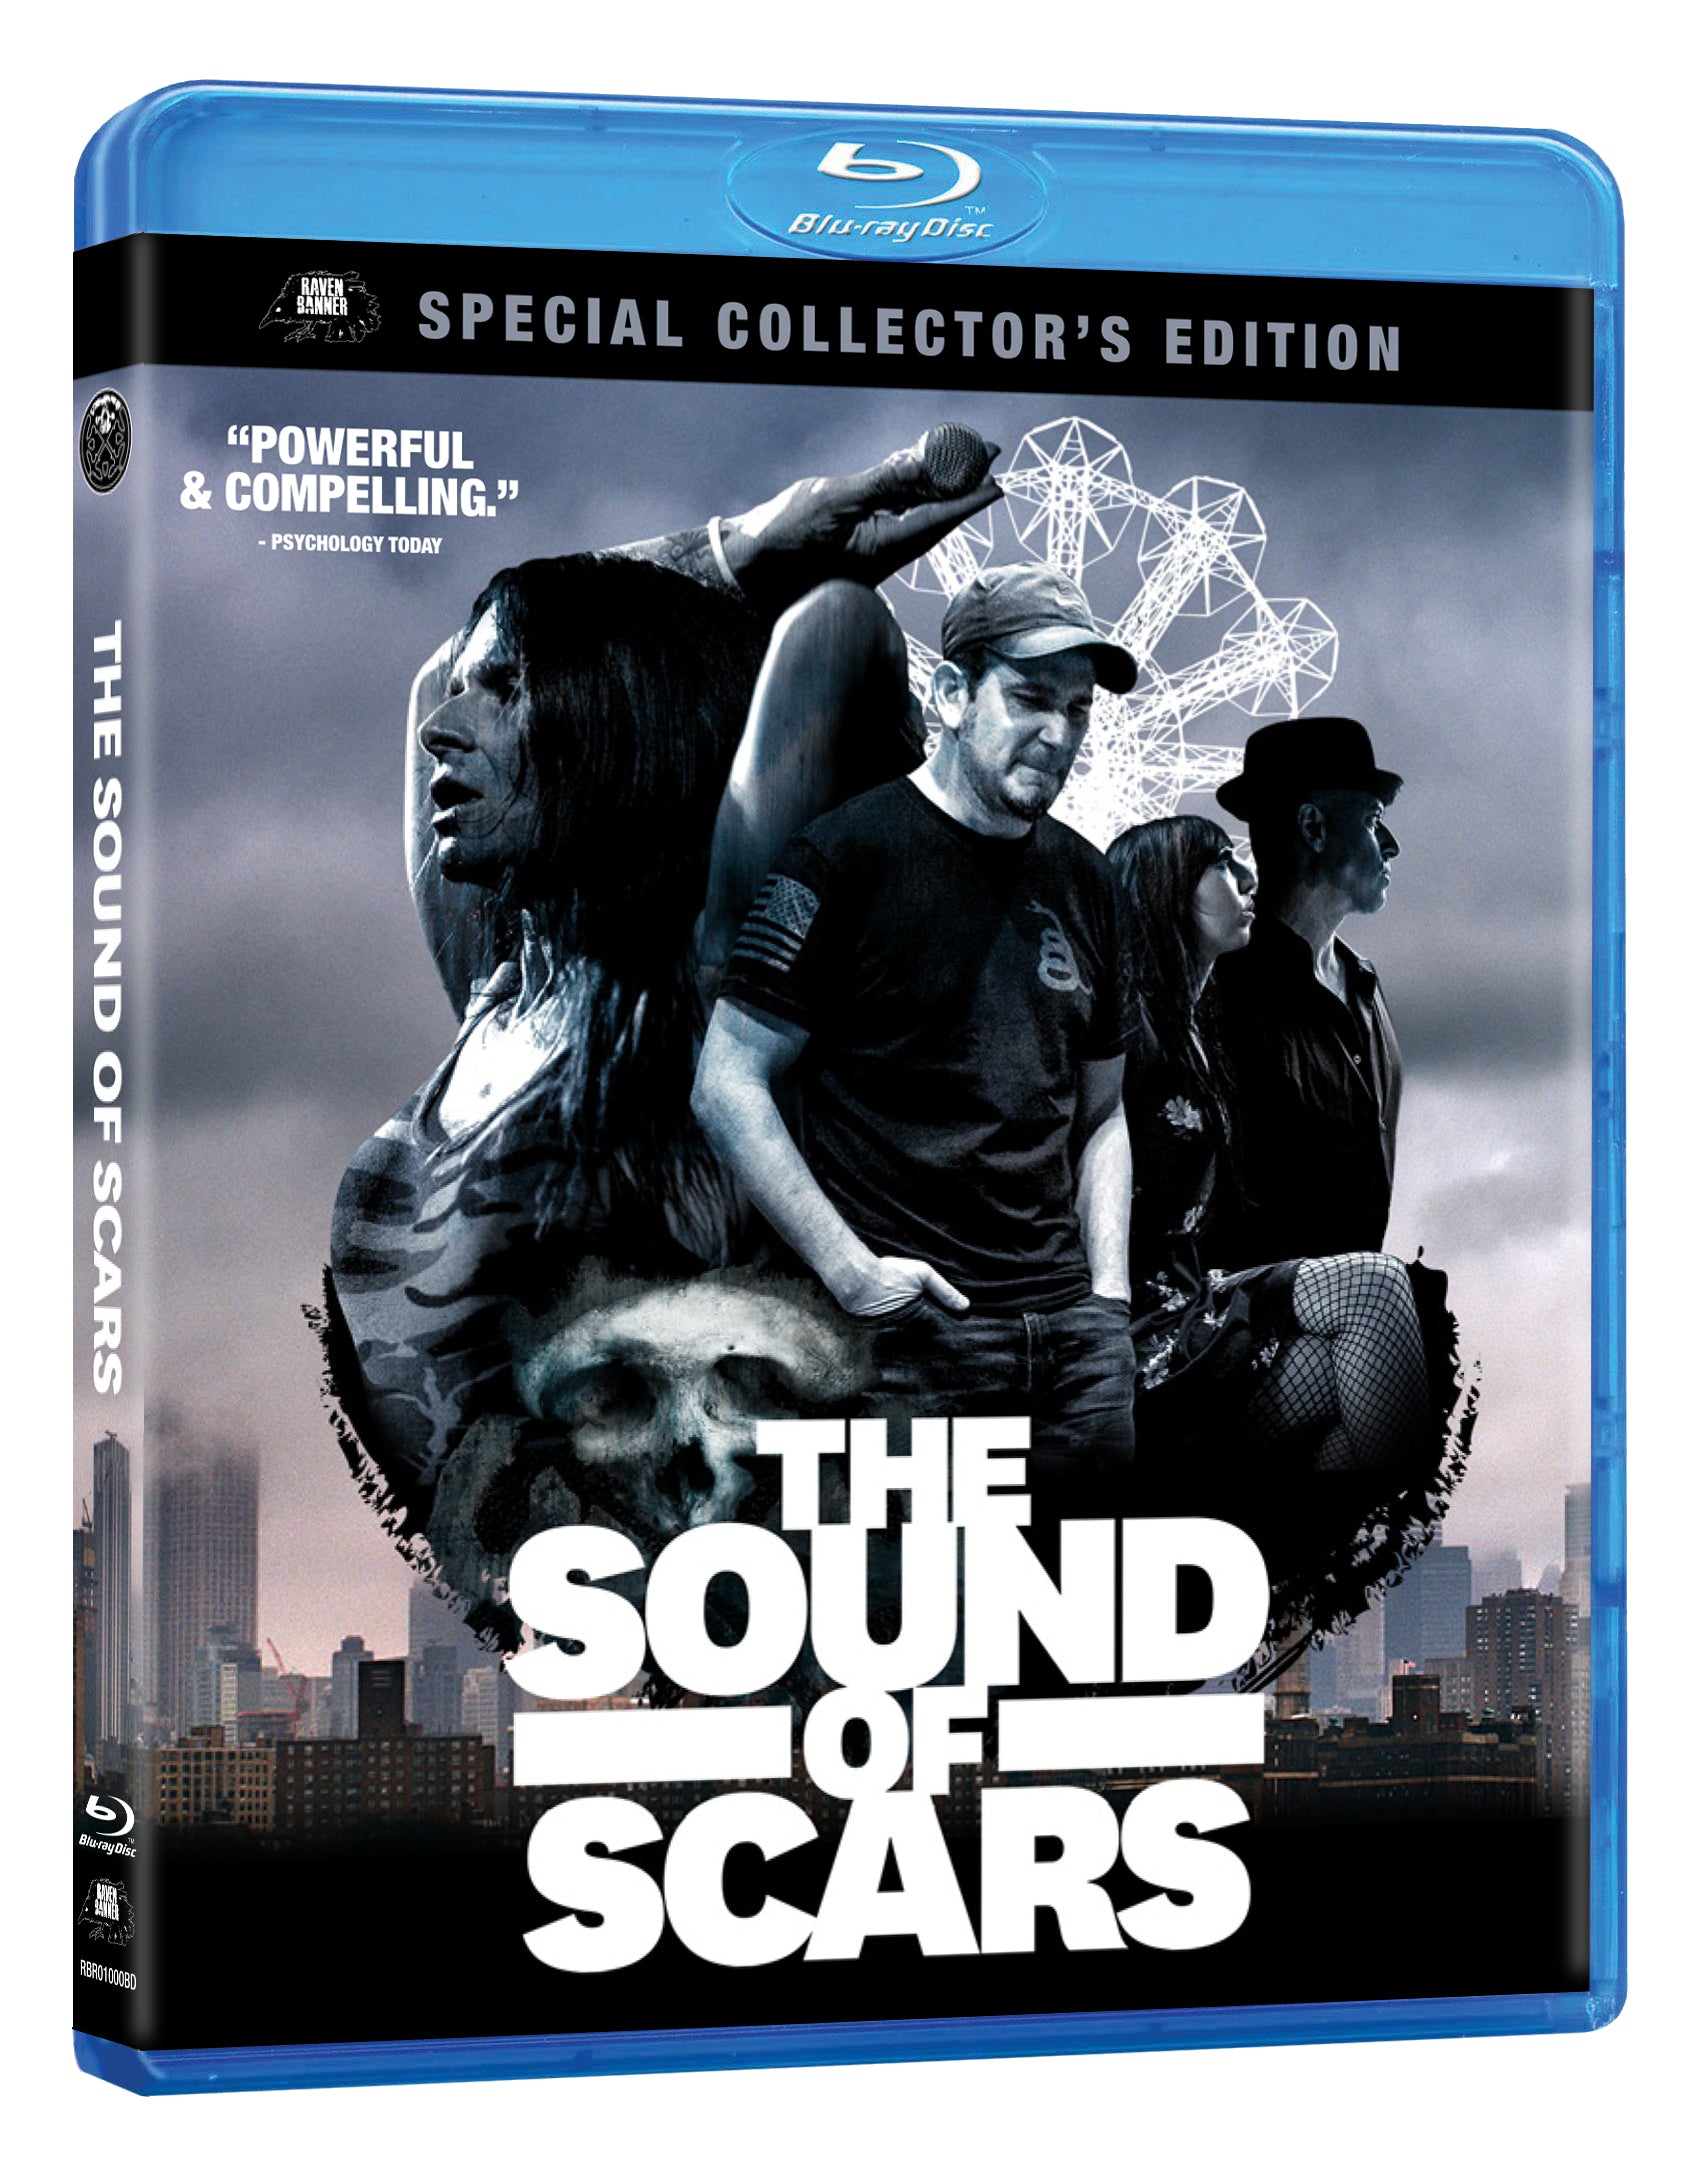 SOUND OF SCARS - COLLECTOR'S EDITION BLU-RAY